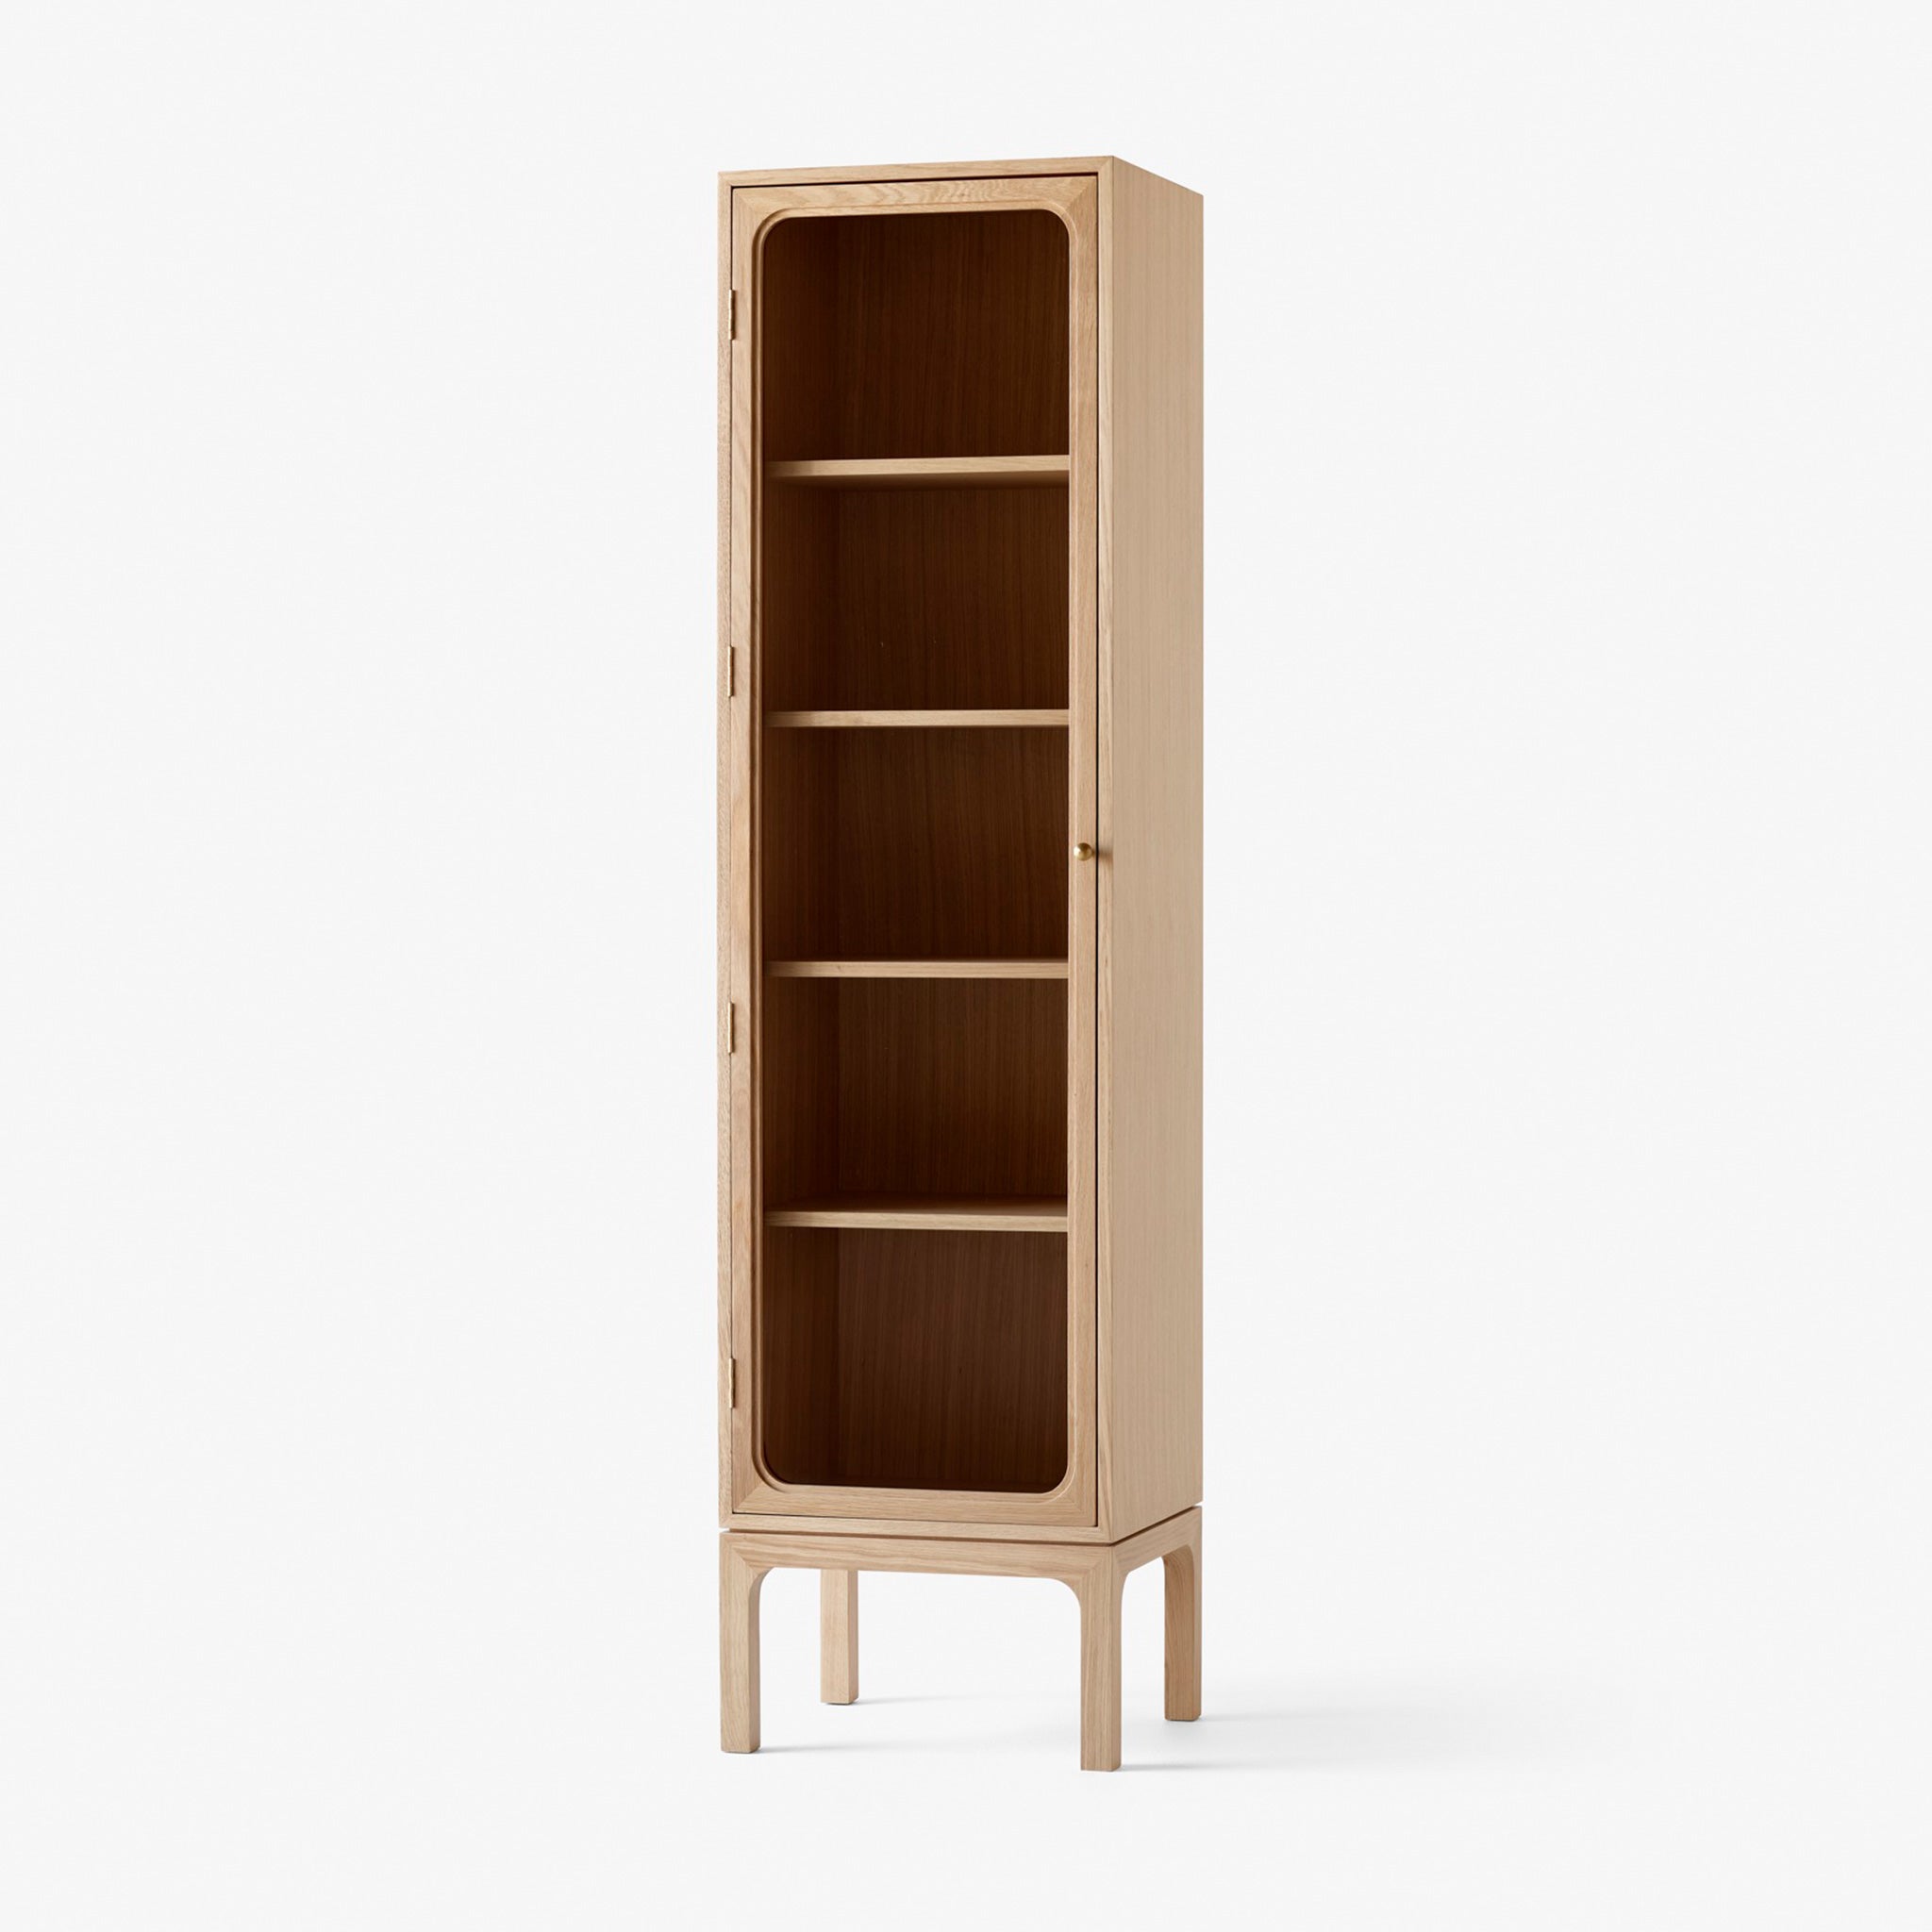 Trace SC87 / SC88 Cabinet By Space Copenhagen for &Tradition